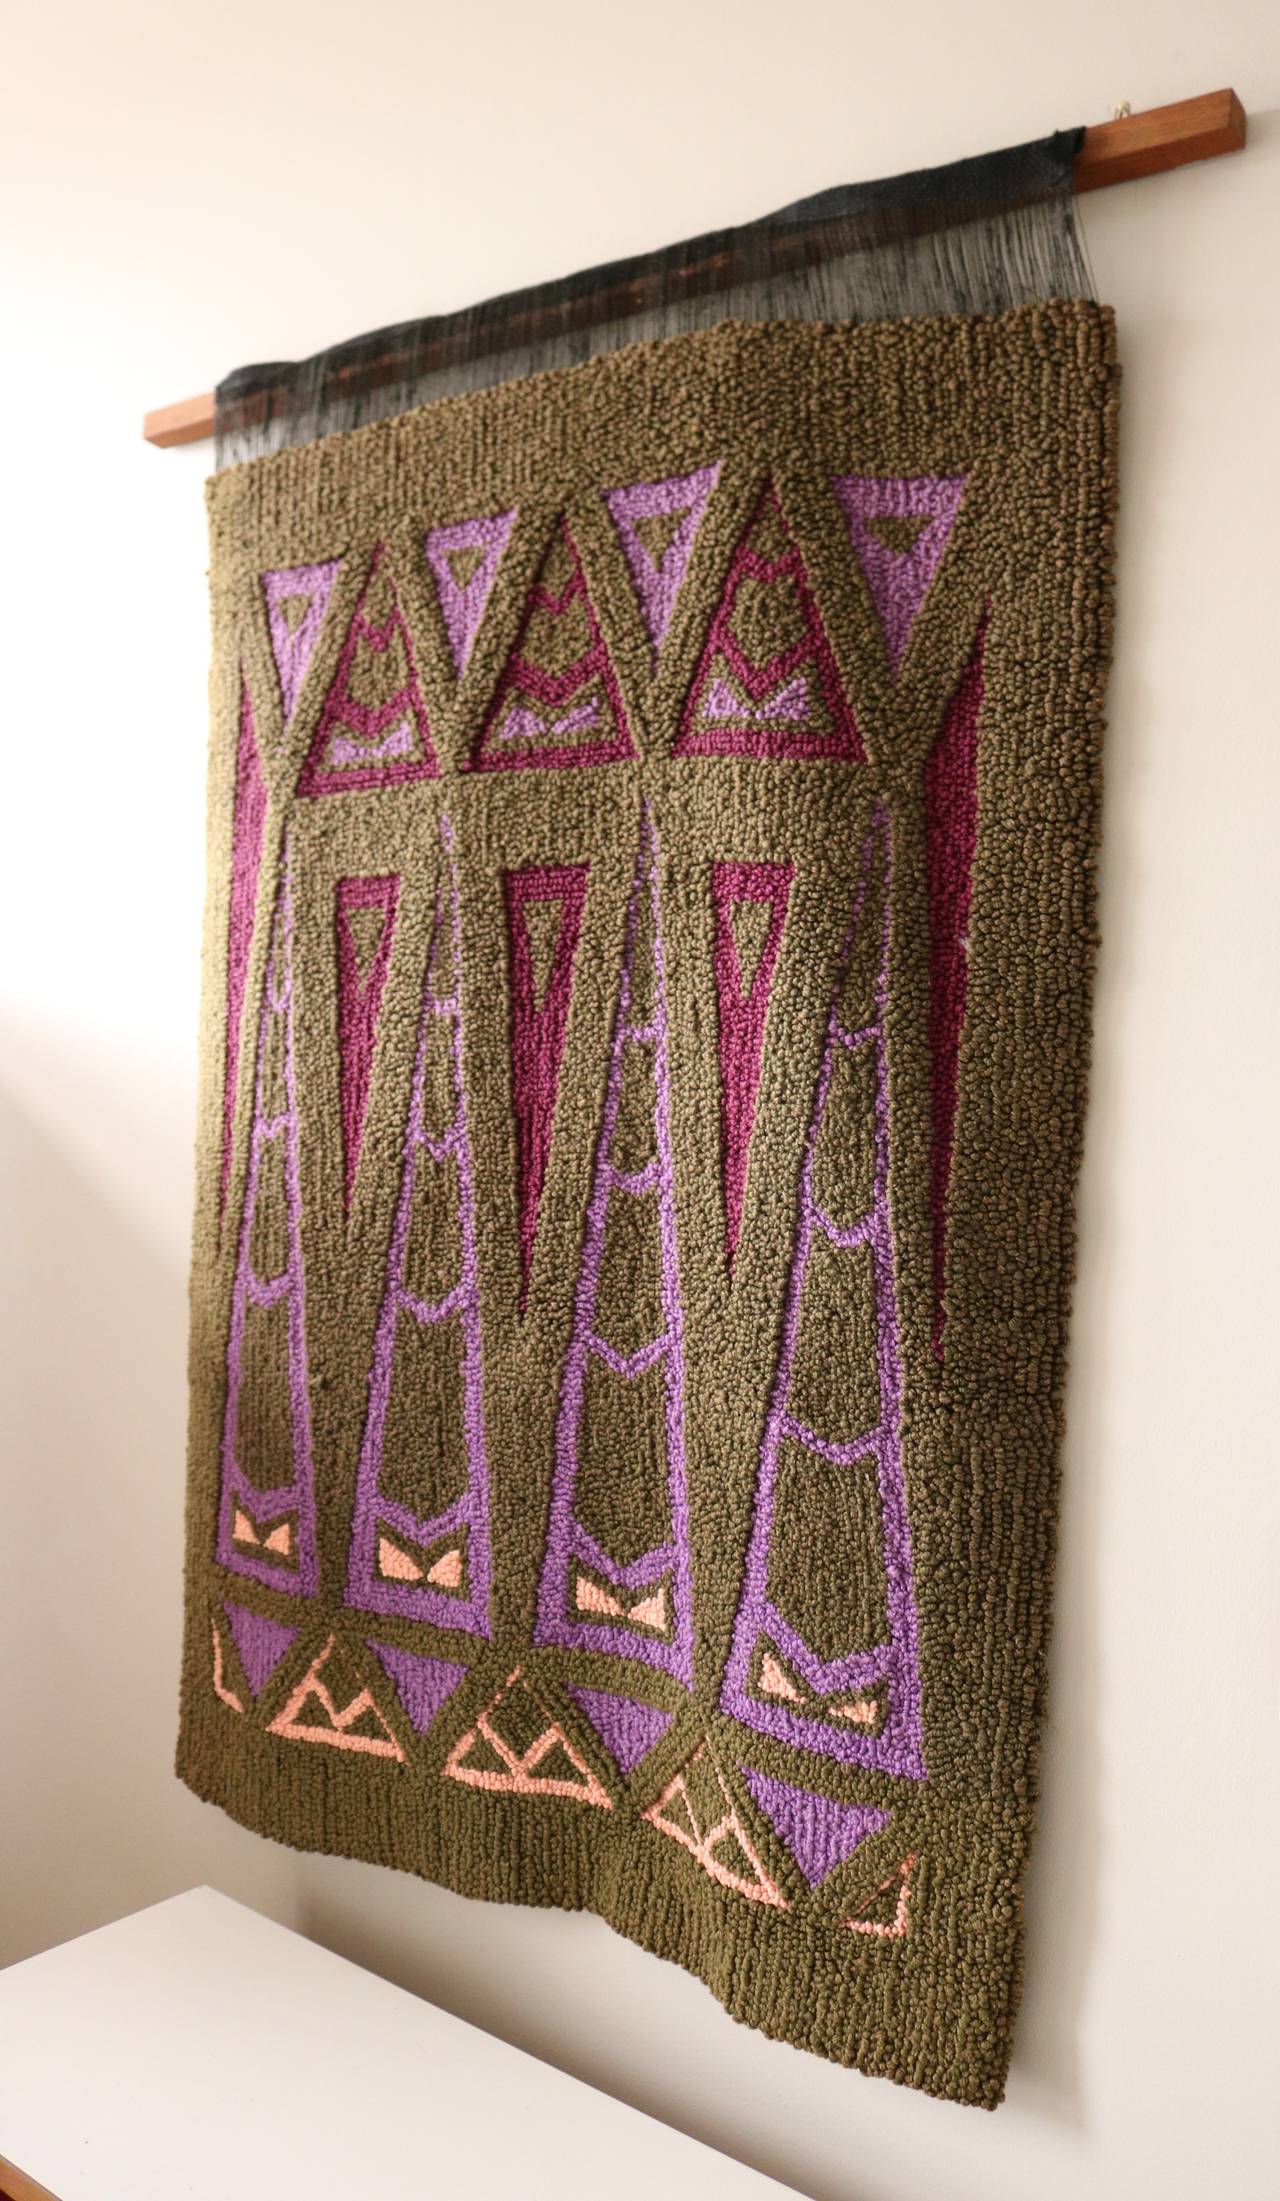 This is a lovely hand knotted fiber art piece by Mamoroneck weaver Beatrice (Betty) Pan.  It takes its cues from art deco motifs and Frank Lloyd Wright windows.  An earthy green background gives way to geometric shapes in wine, lavender and peach. 